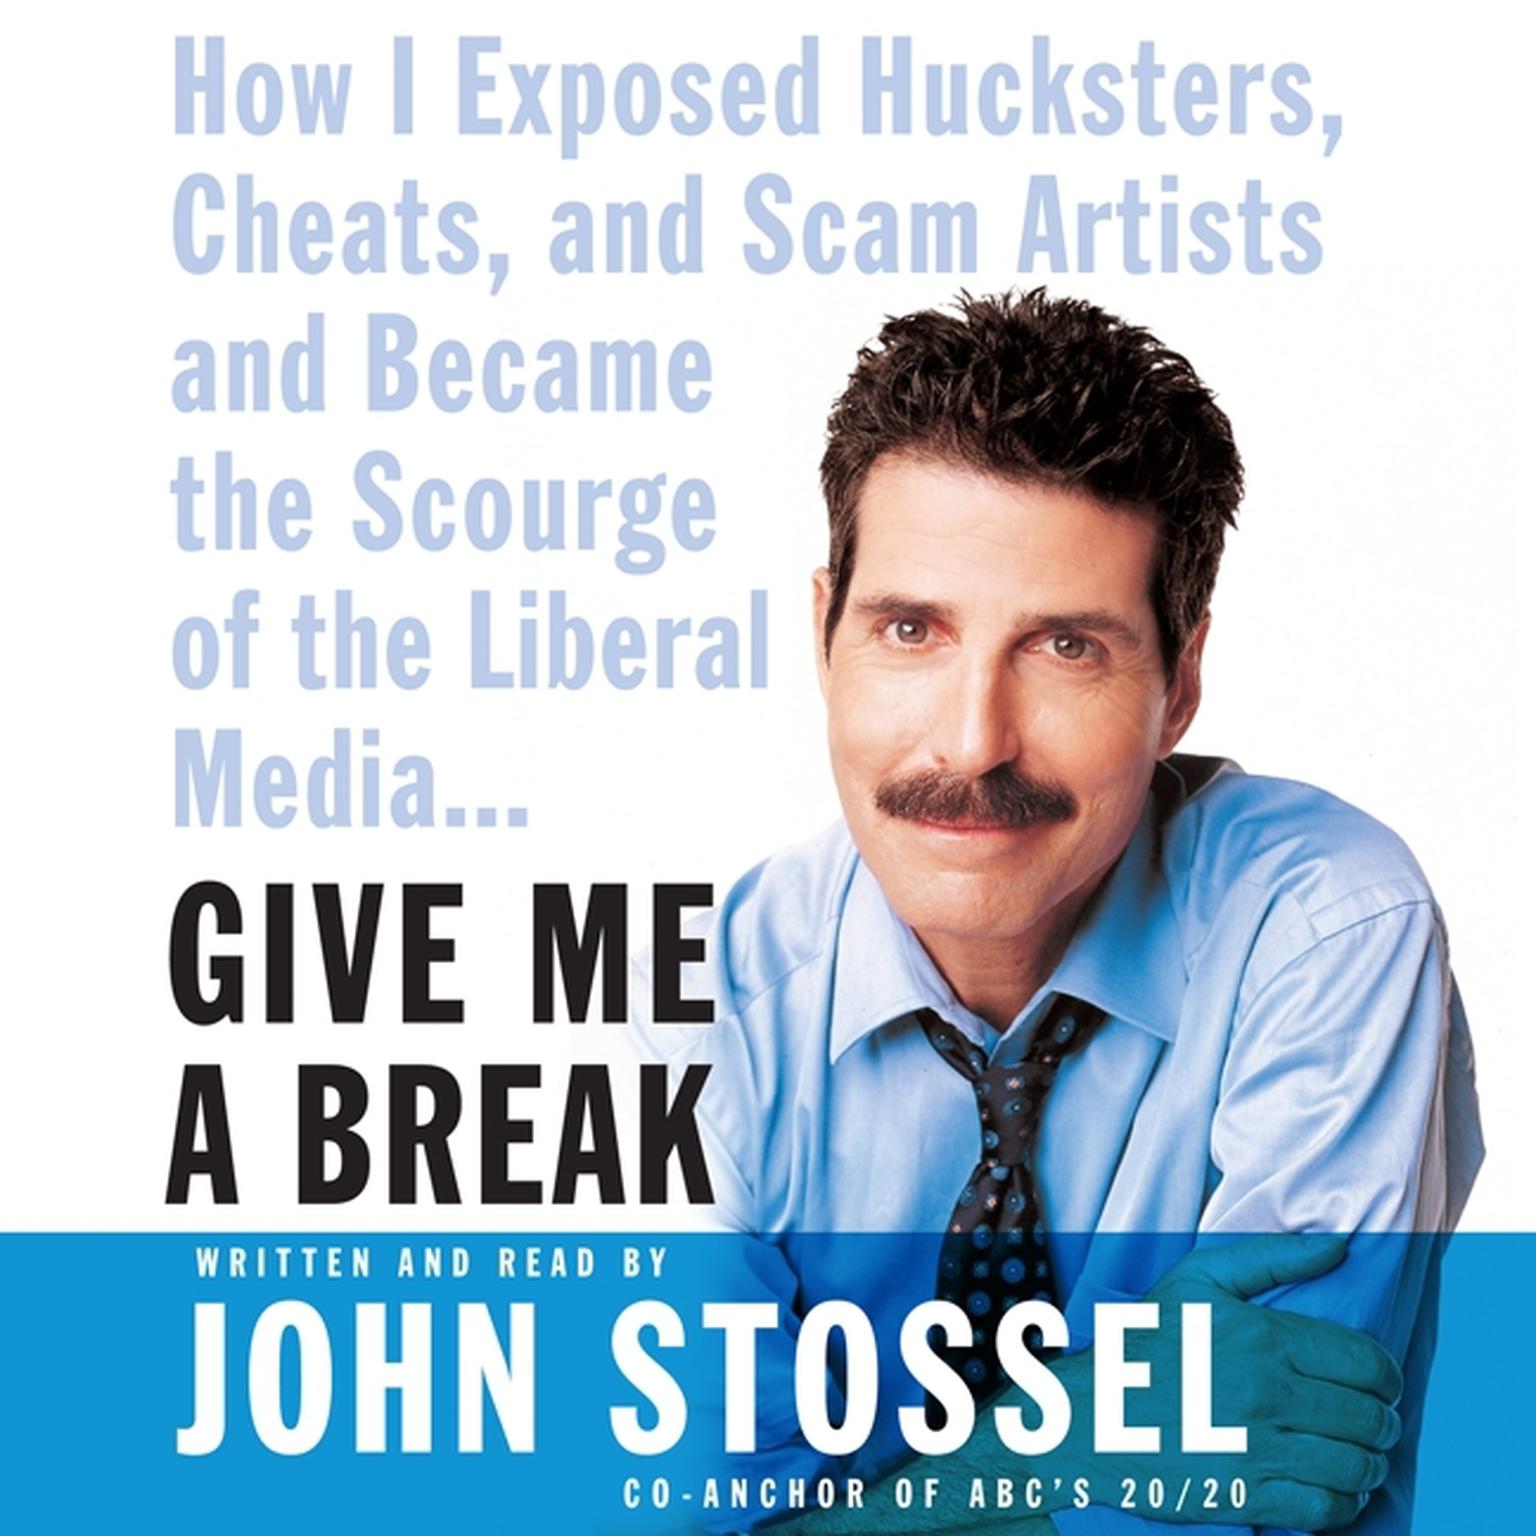 Give Me a Break (Abridged): How I Exposed Hucksters, Cheats, and Scam Artists and Became the Scourge of the Liberal Media... Audiobook, by John Stossel